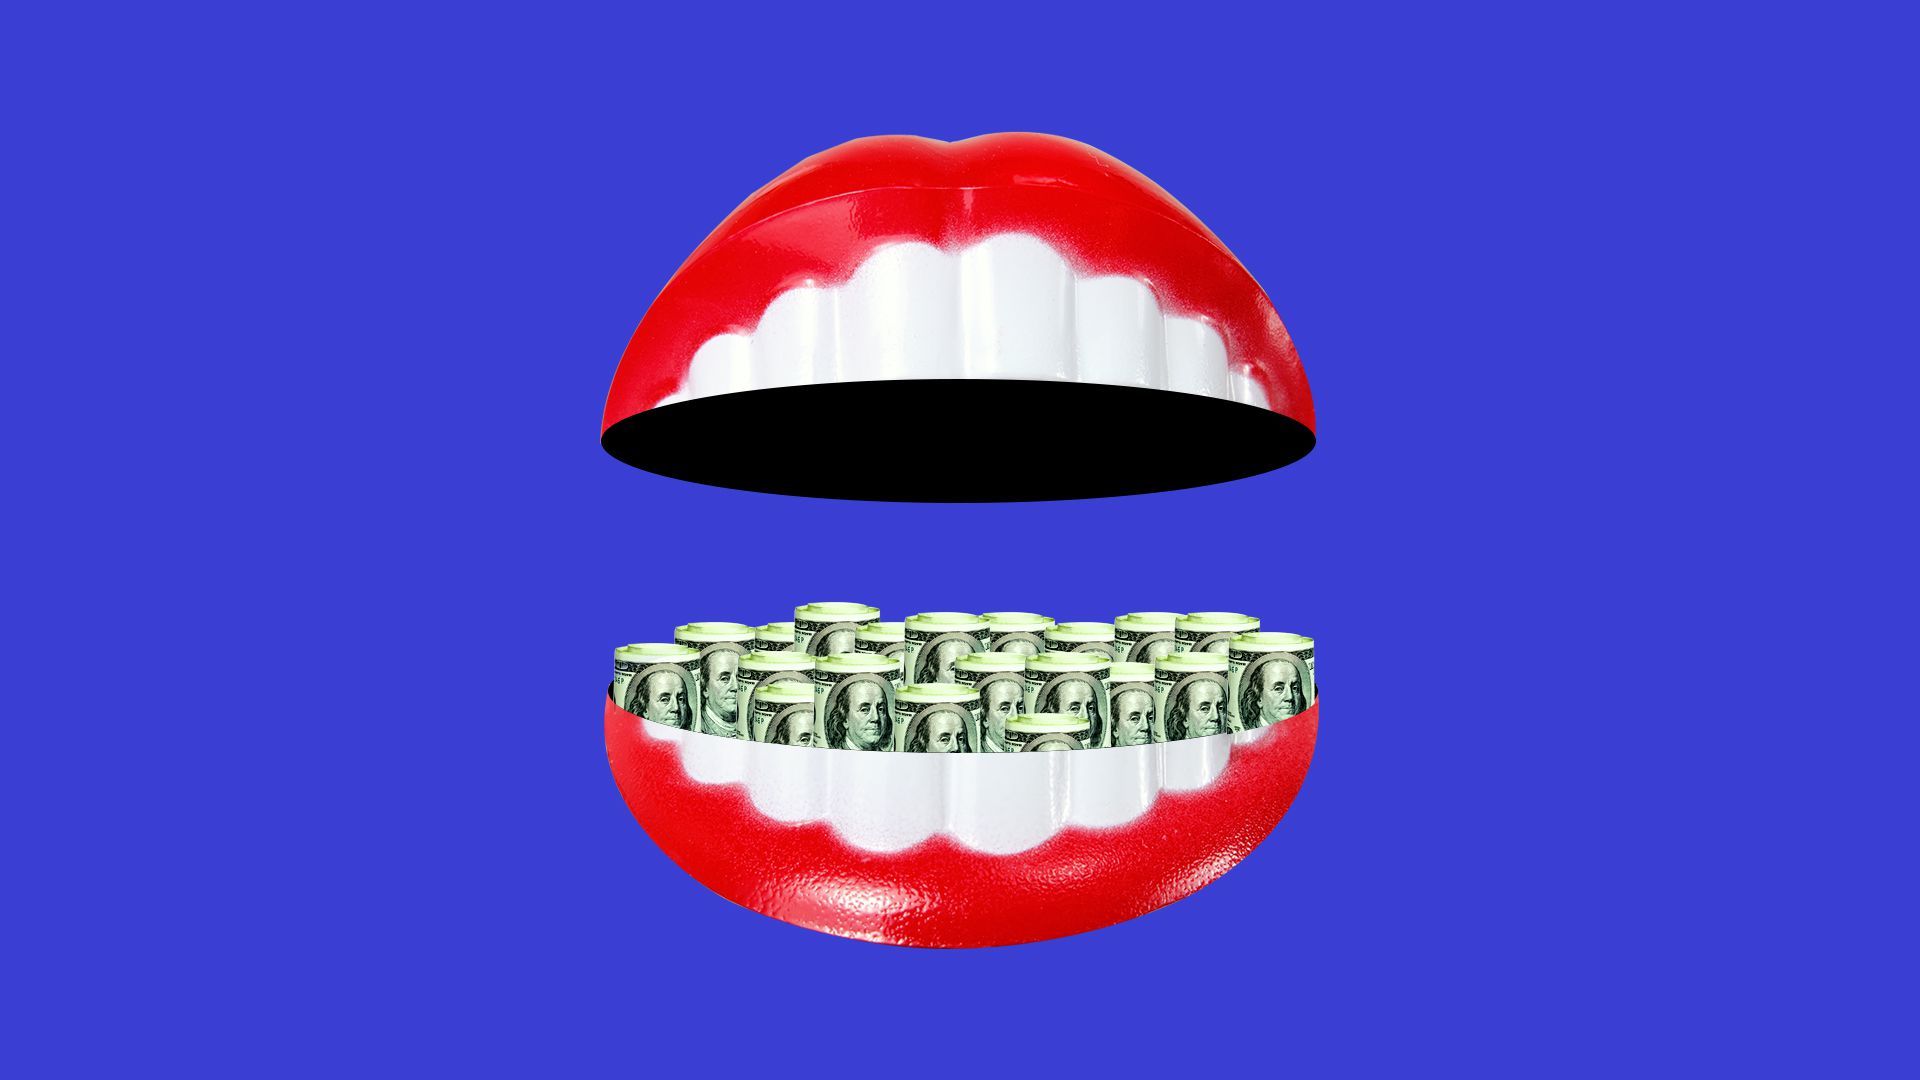 Illustration of teeth opening wide with rolled 100 dollar bills inside.